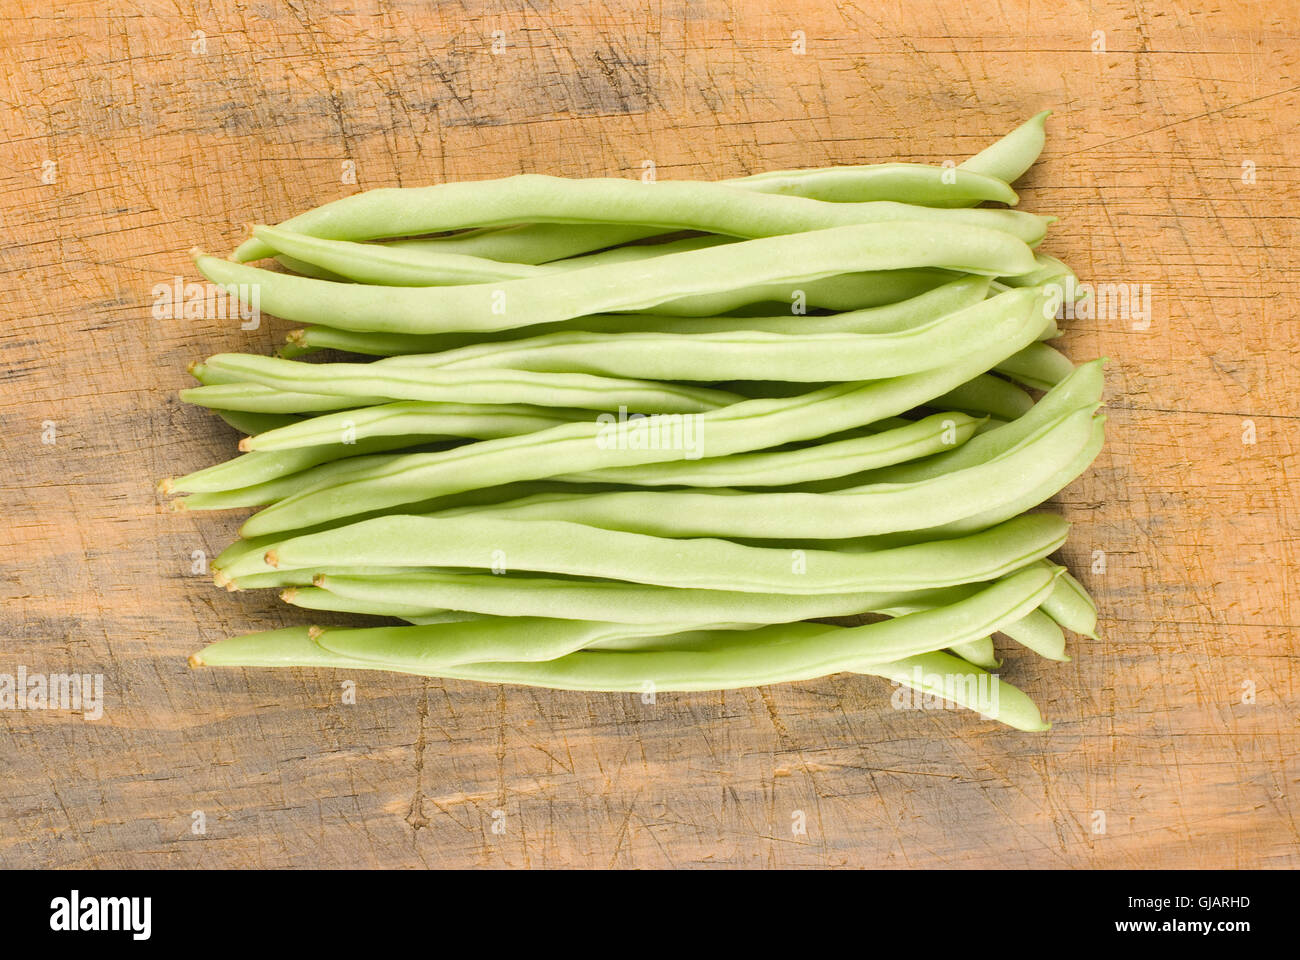 String bean and cutting board Stock Photo - Alamy